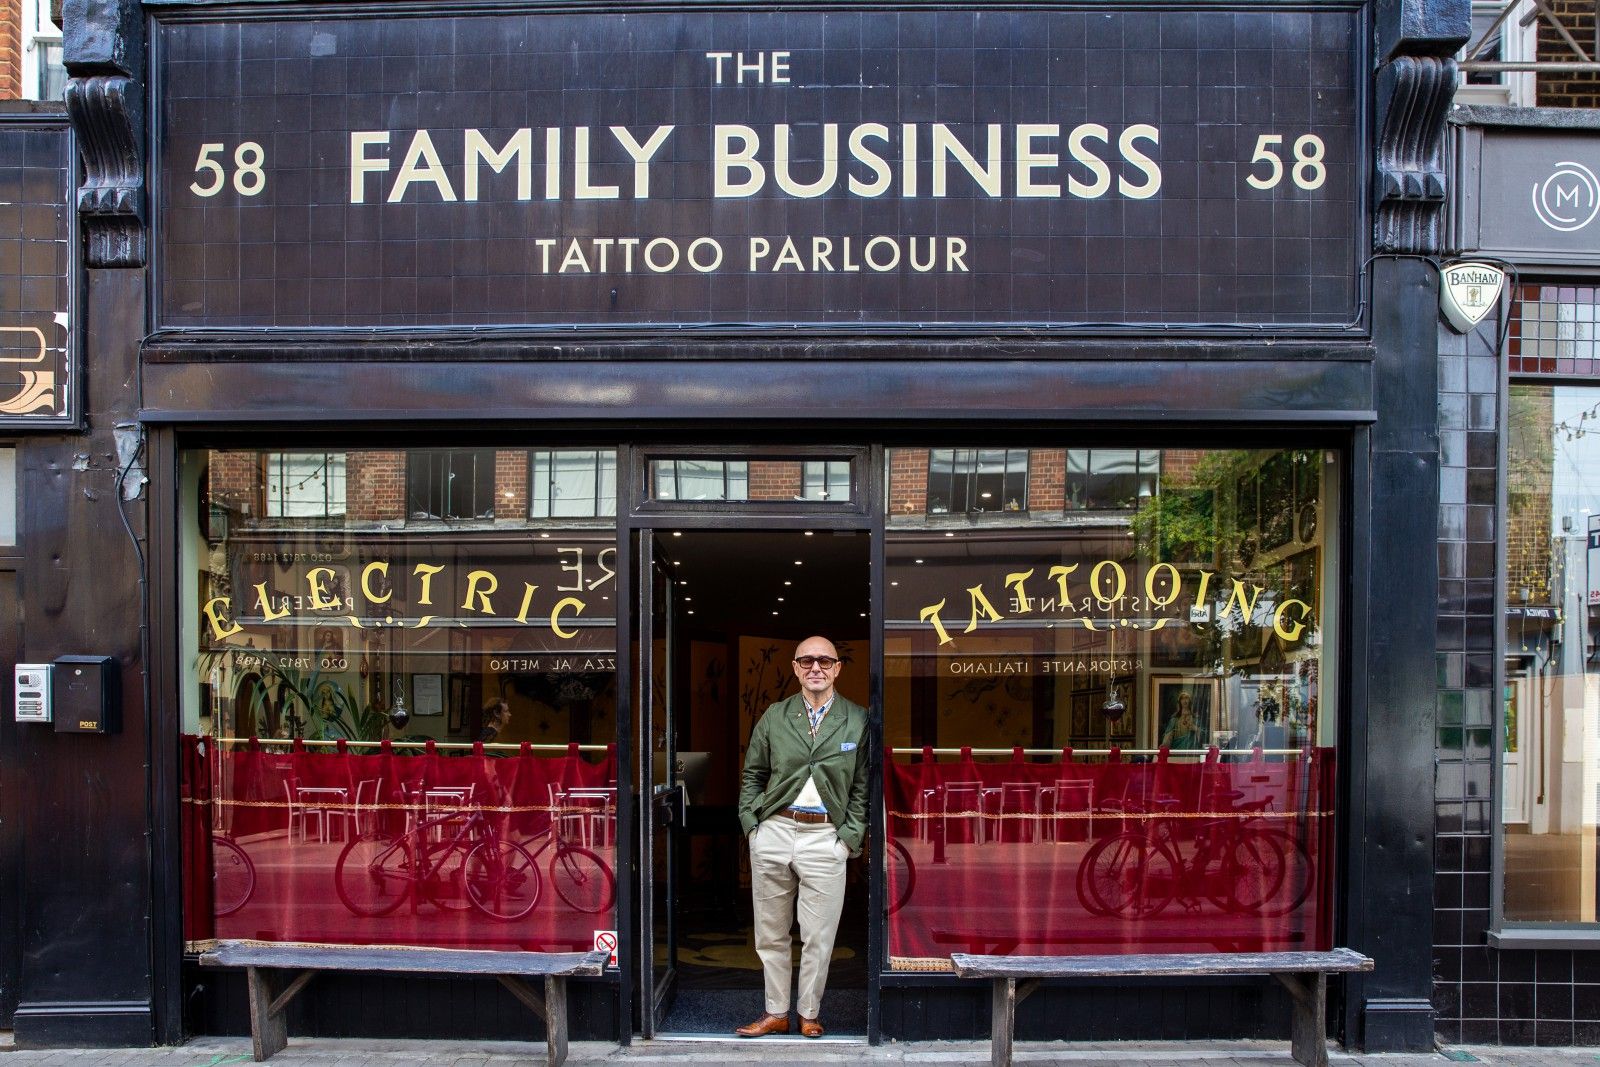 A man standing outside The Family Business tattoo parlour